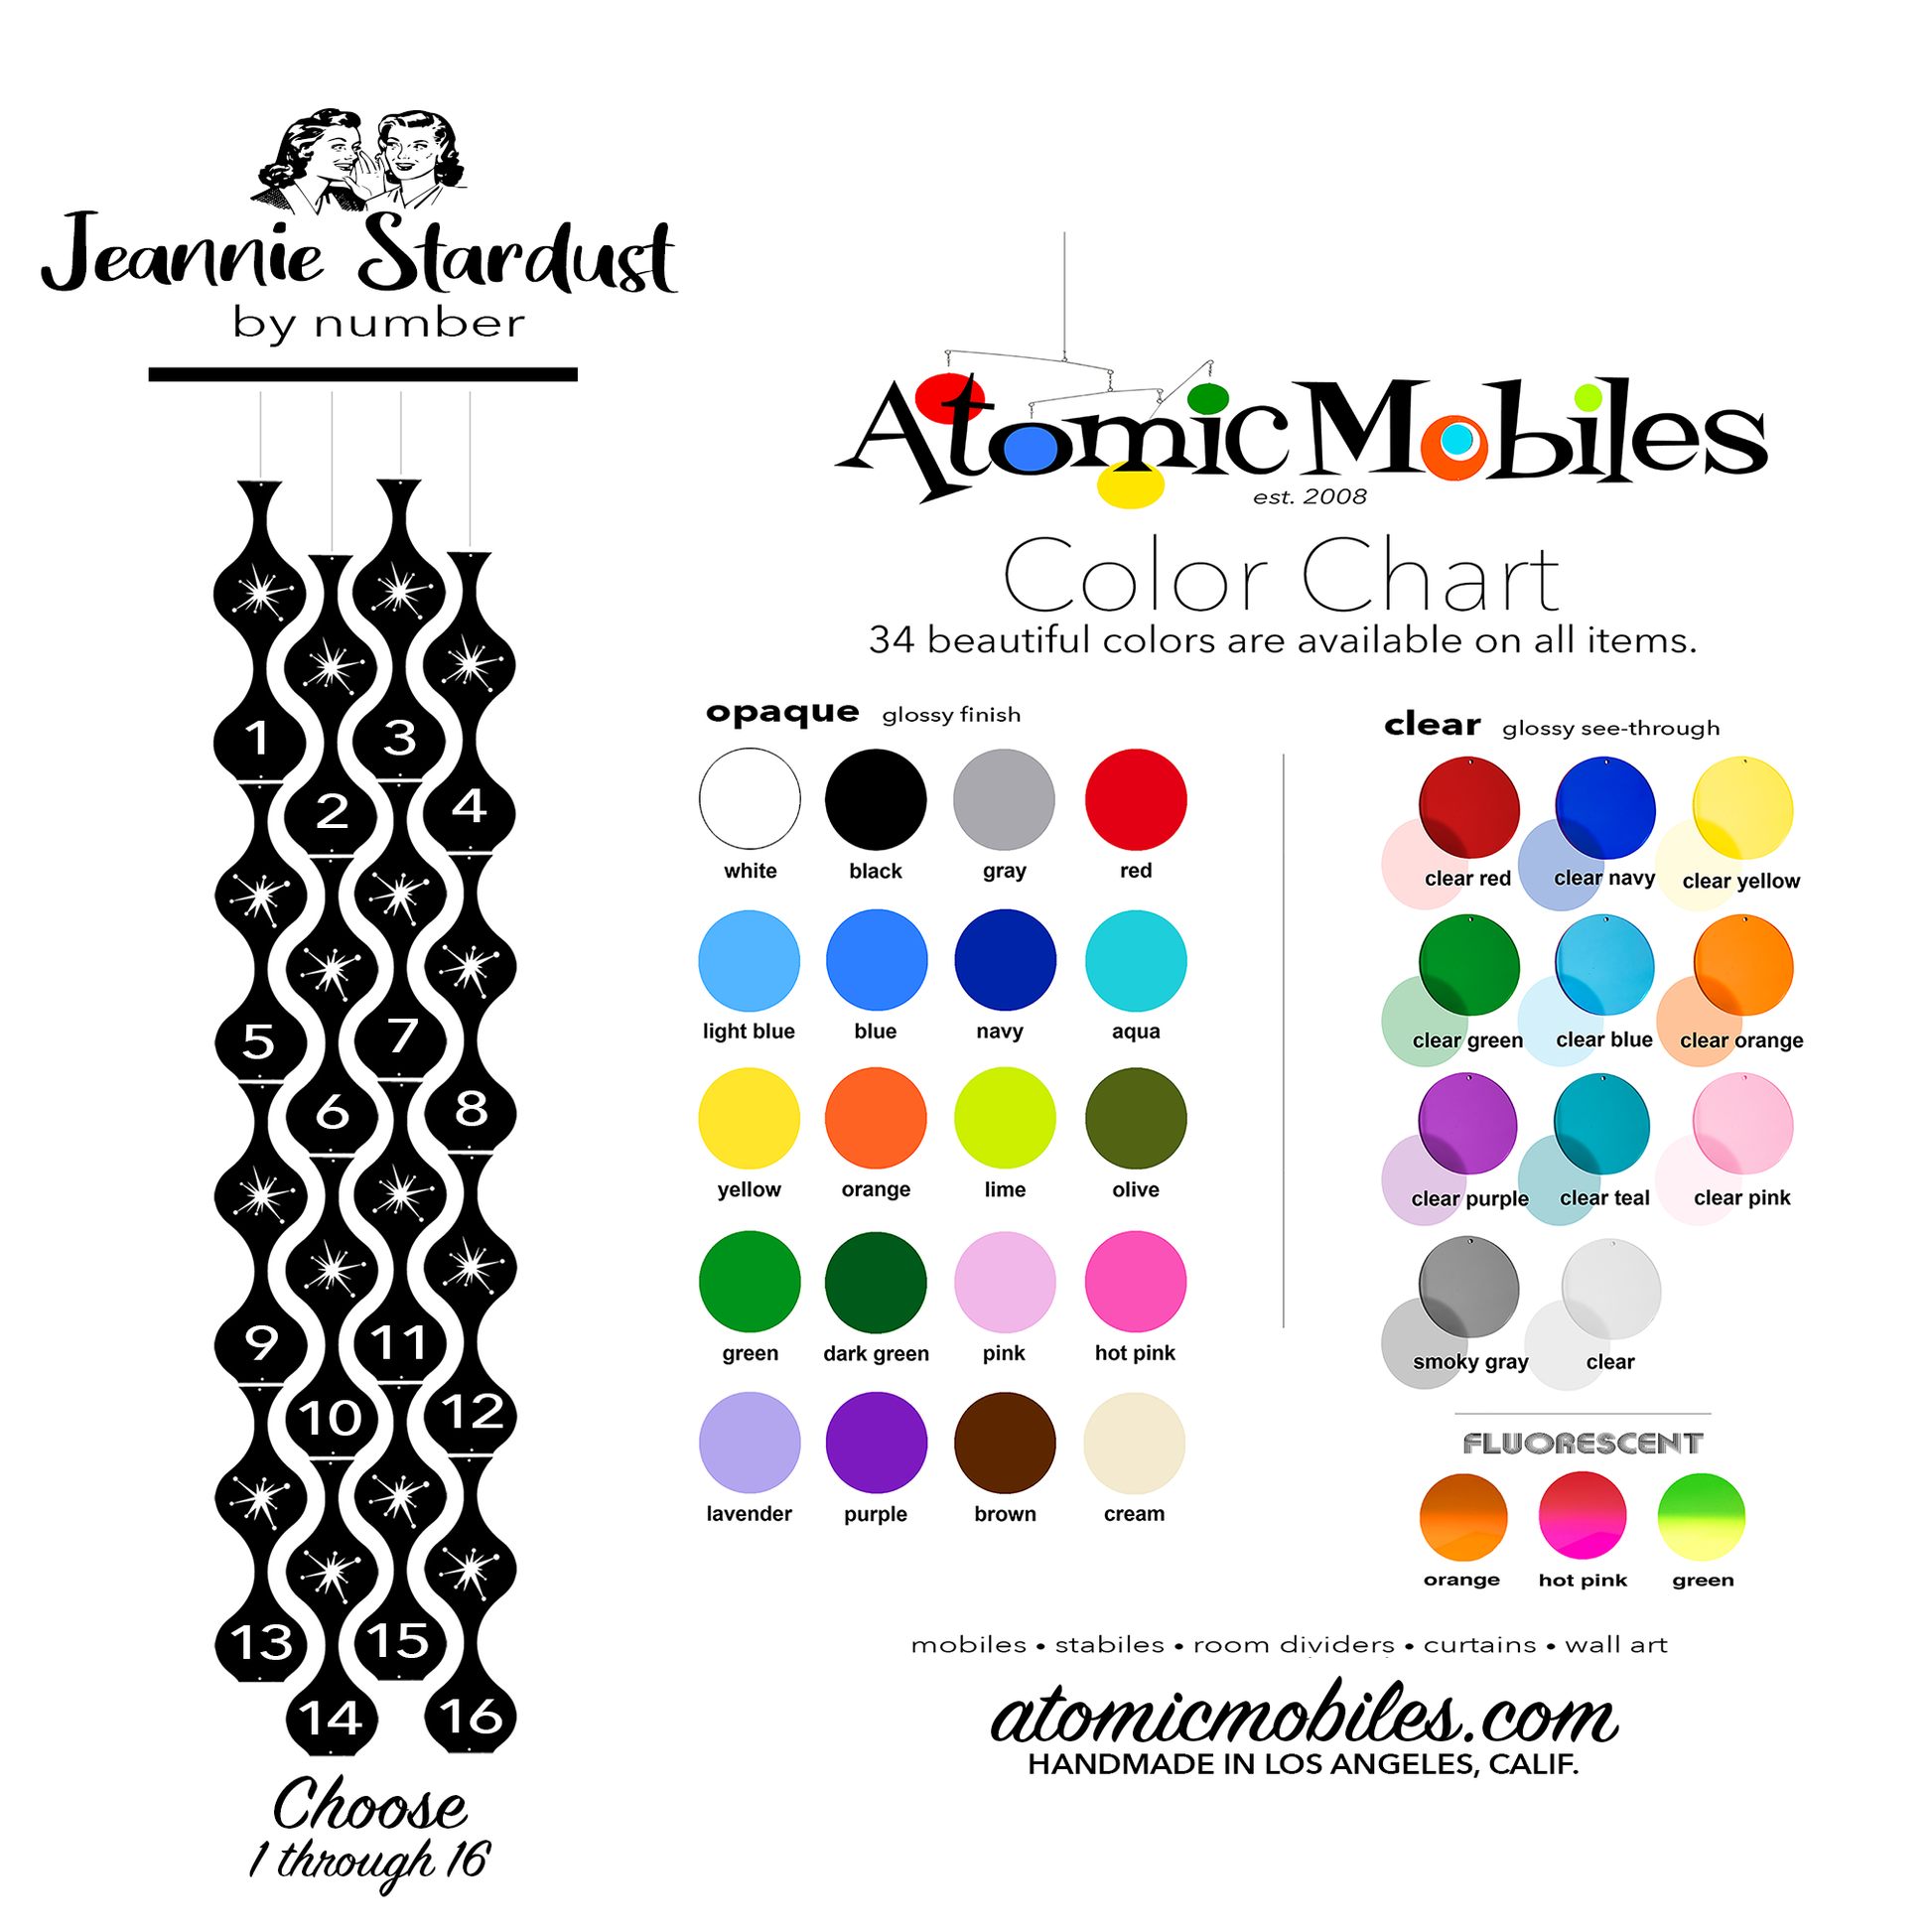 Color Chart for Jeannie Stardust Retro Hanging Art Mobiles DIY Kit by AtomicMobiles.com